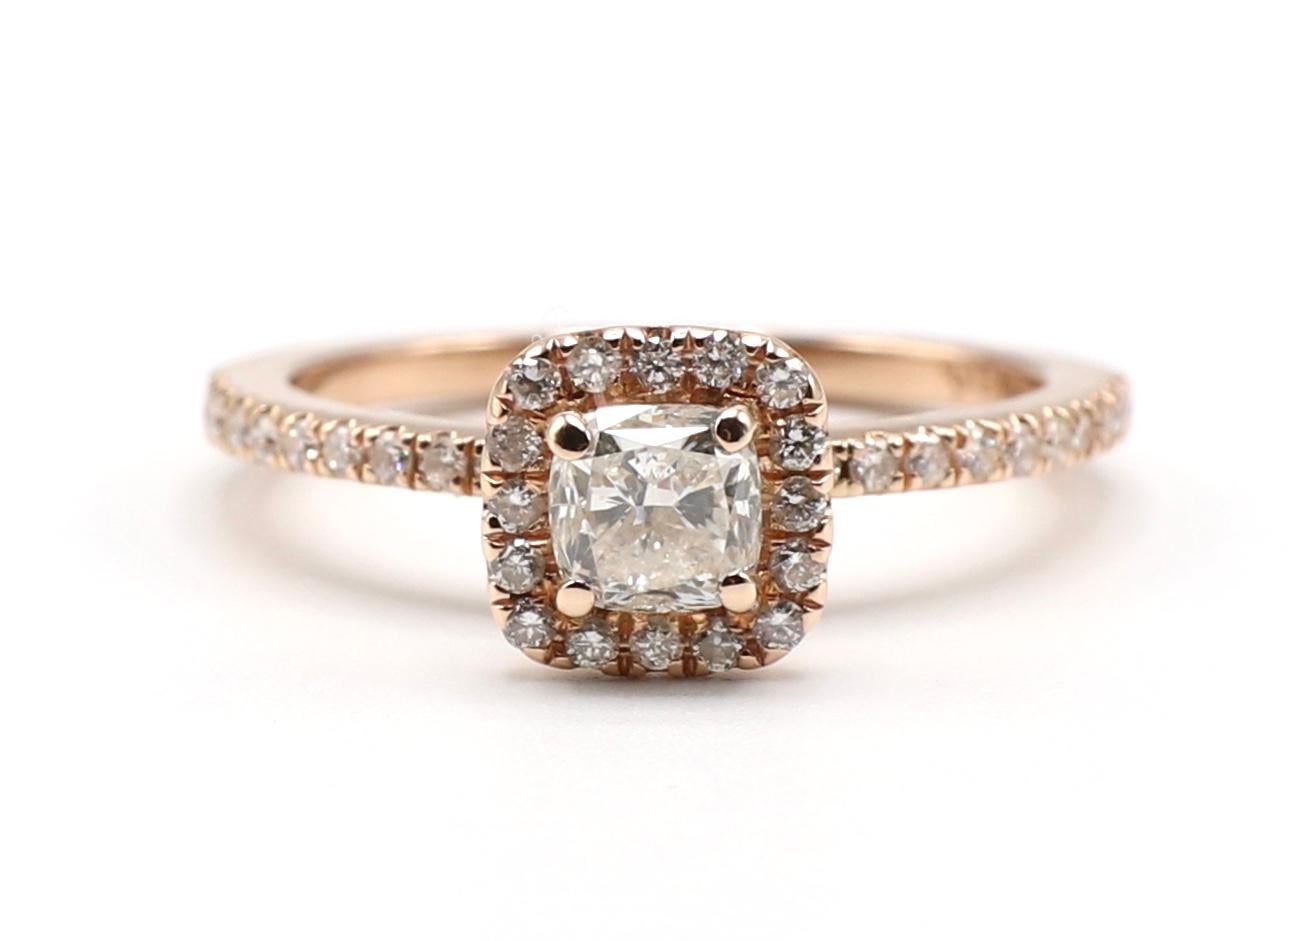 Vintage 14K Rose / Pink Gold 1/2 carat Diamond Cushion Halo Engagement Ring Size 6.25

Metal: 14K rose gold
Weight: 2.79 grams
Diamonds: 1 cushion cut diamond, approx. .50 cts, H SI, 39 small round diamonds on the band and halo, approx. .25 CTW G